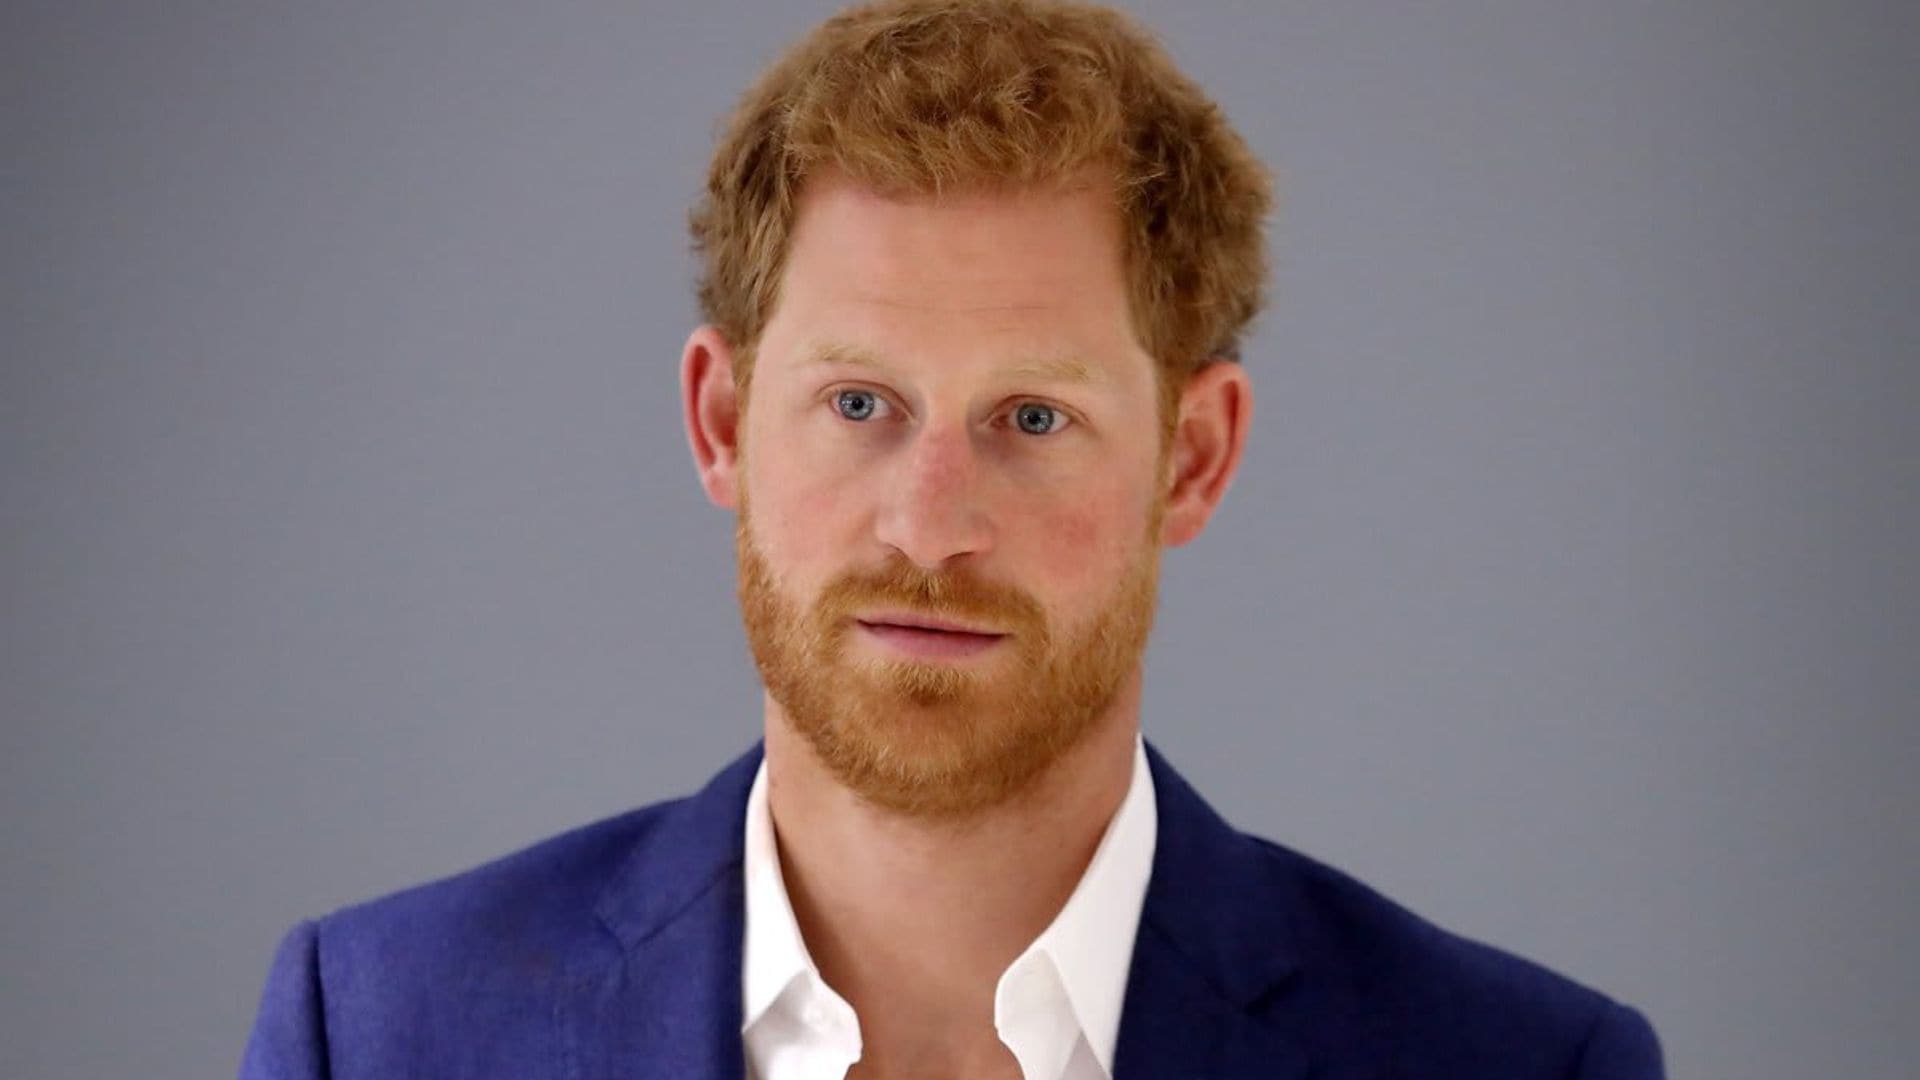 Prince Harry encourages fellow veterans to support each other amid situation in Afghanistan